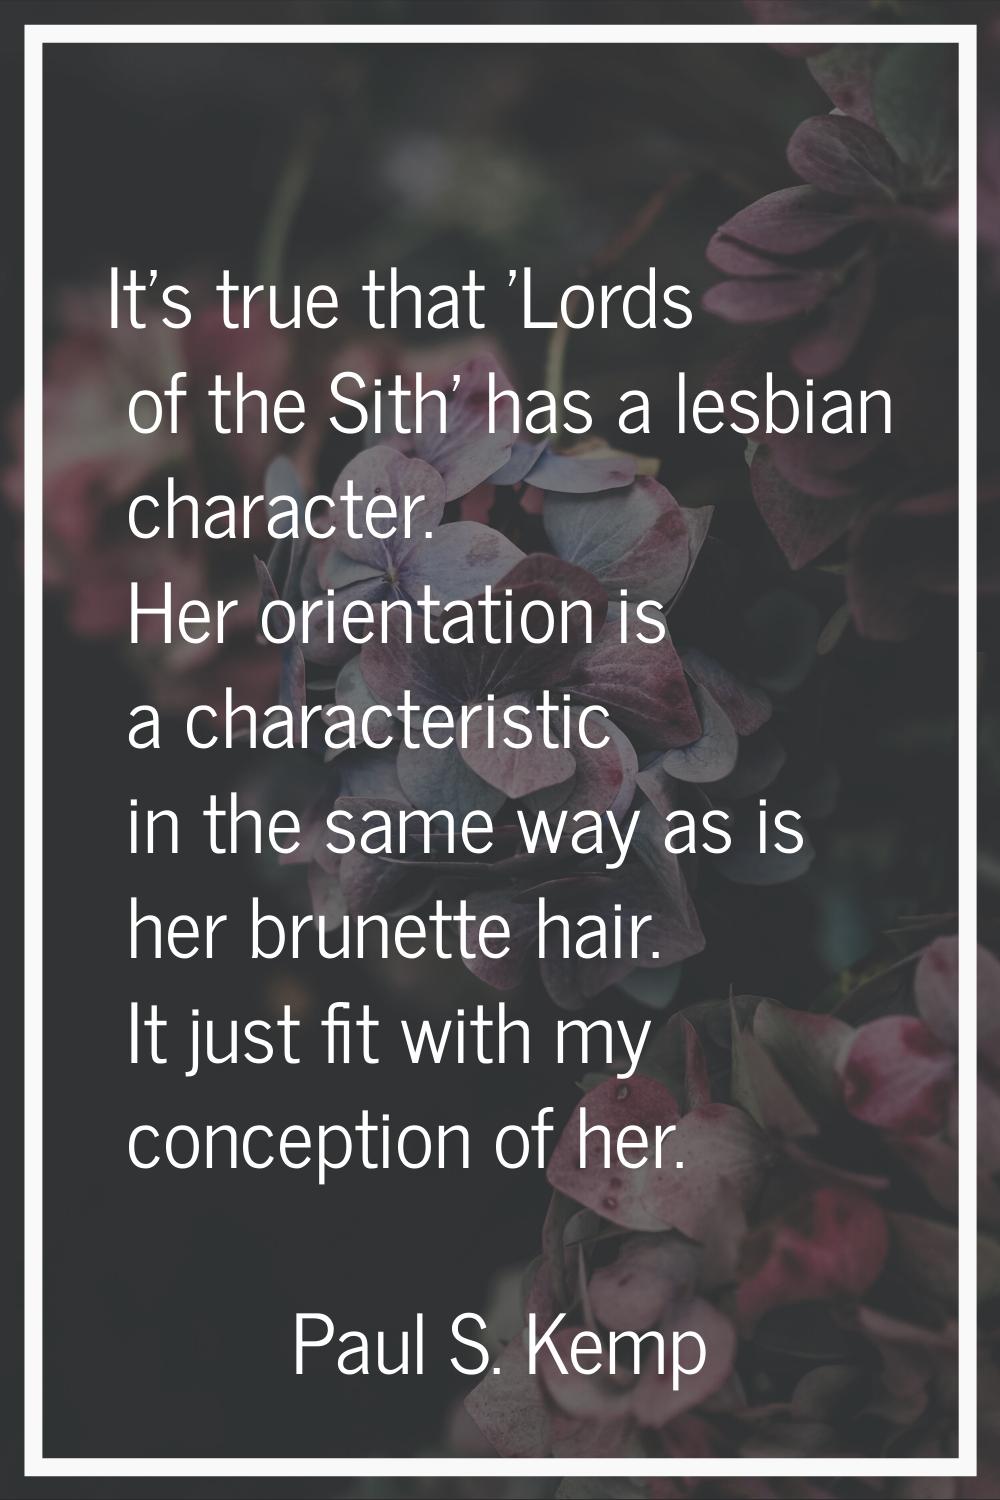 It's true that 'Lords of the Sith' has a lesbian character. Her orientation is a characteristic in 